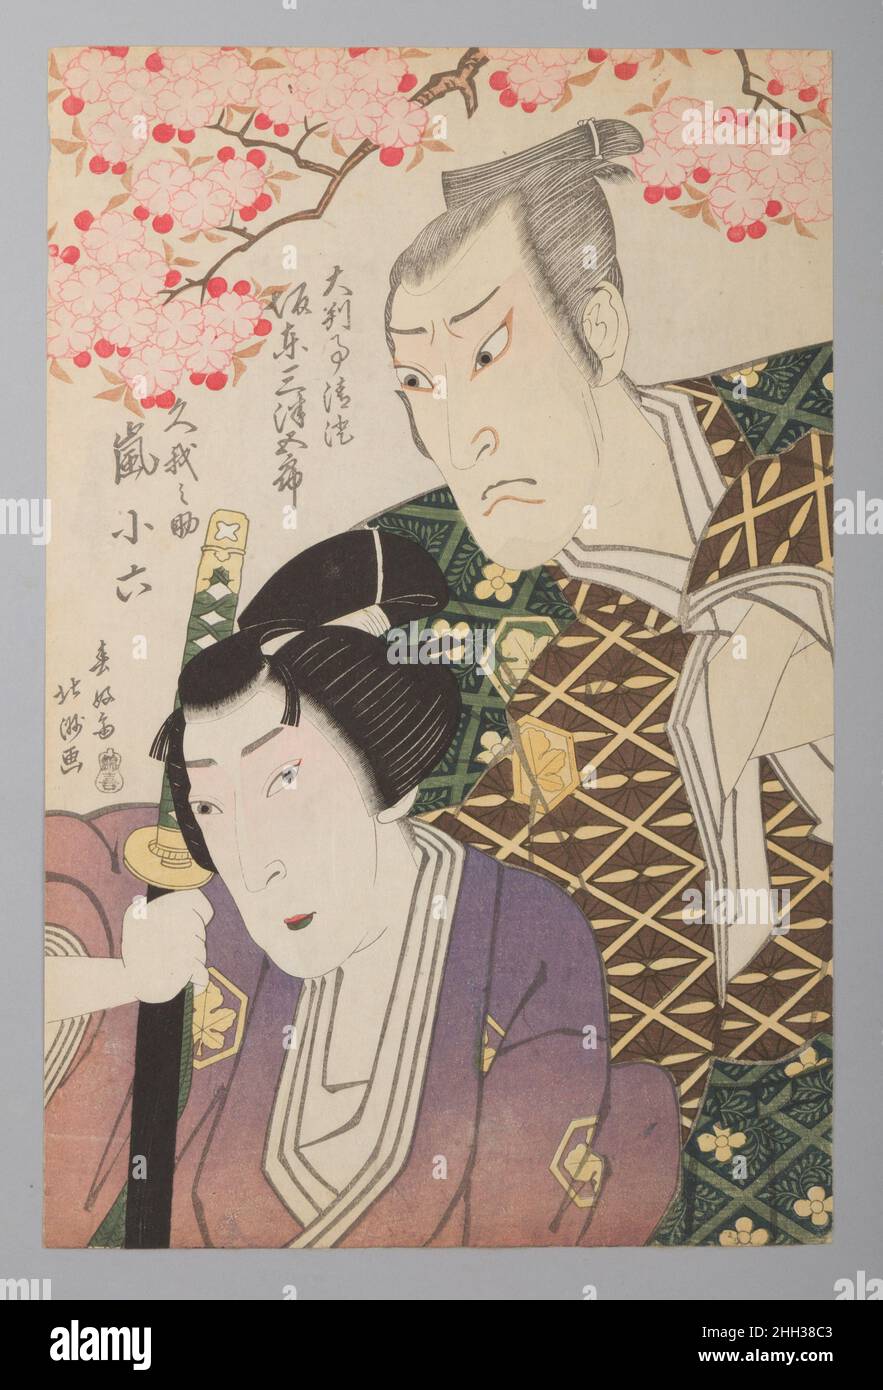 https://c8.alamy.com/comp/2HH38C3/band-mitsugor-iii-as-daihanji-kiyozumi-and-arashi-koroku-iv-as-koganosuke-1821-shunksai-hokush-japanese-the-kabuki-play-mount-imo-and-mount-se-an-exemplary-tale-of-womanly-virtue-imoseyama-onna-teikin-originally-based-on-a-puppet-play-is-set-in-ancient-japan-when-the-soga-clan-served-as-regents-to-the-emperor-two-children-hinadori-and-koganosuke-of-rival-court-families-are-held-hostage-under-orders-from-the-tyrant-soga-no-iruka-to-ensure-their-families-do-not-revolt-the-children-fall-in-love-but-rather-than-create-conflicts-for-their-families-they-each-vow-to-die-by-suicid-2HH38C3.jpg